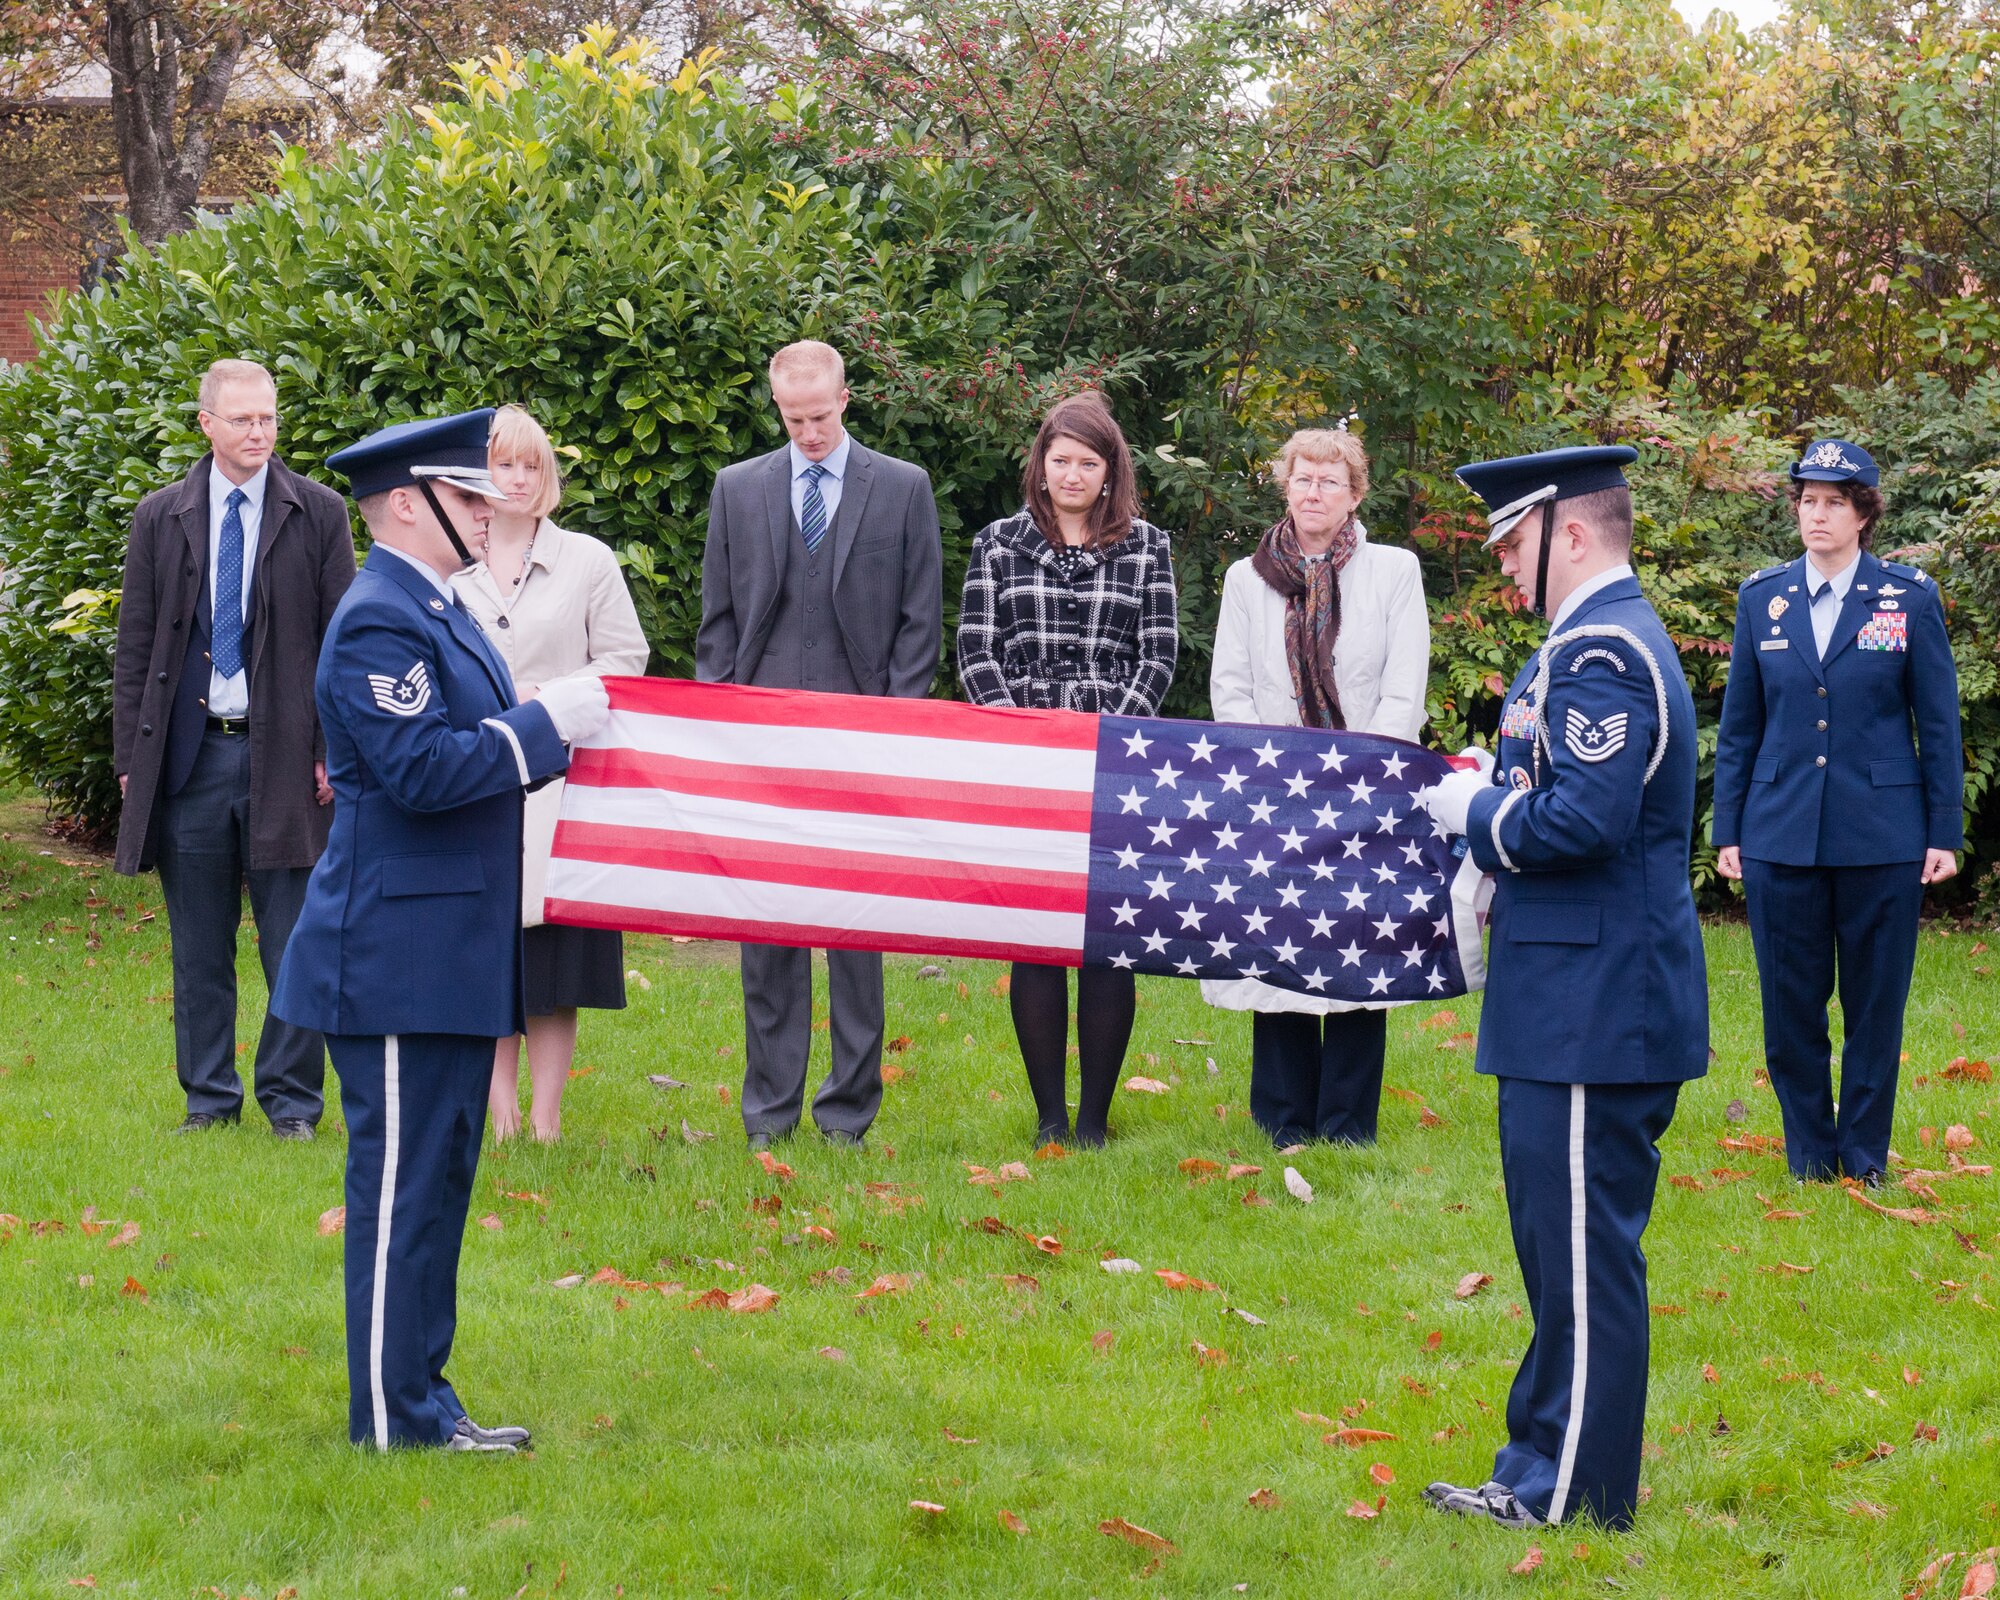 RAF ALCONBURY, United Kingdom – Tech. Sgts. Jeffrey Empson and Christopher Ackerman, 423rd Air Base Group Honor Guard, fold the U.S. flag during a ceremony for retired Tech. Sgt. Emil Dihlmann at the RAF Alconbury flagpoles Oct. 26. Dihlmann served at RAF Alconbury from 1943 to 1945 and he had such fond memories of his time there that his family asked if they could spread his ashes on the base. (U.S. Air Force photo by Staff Sgt. Brian Stives)